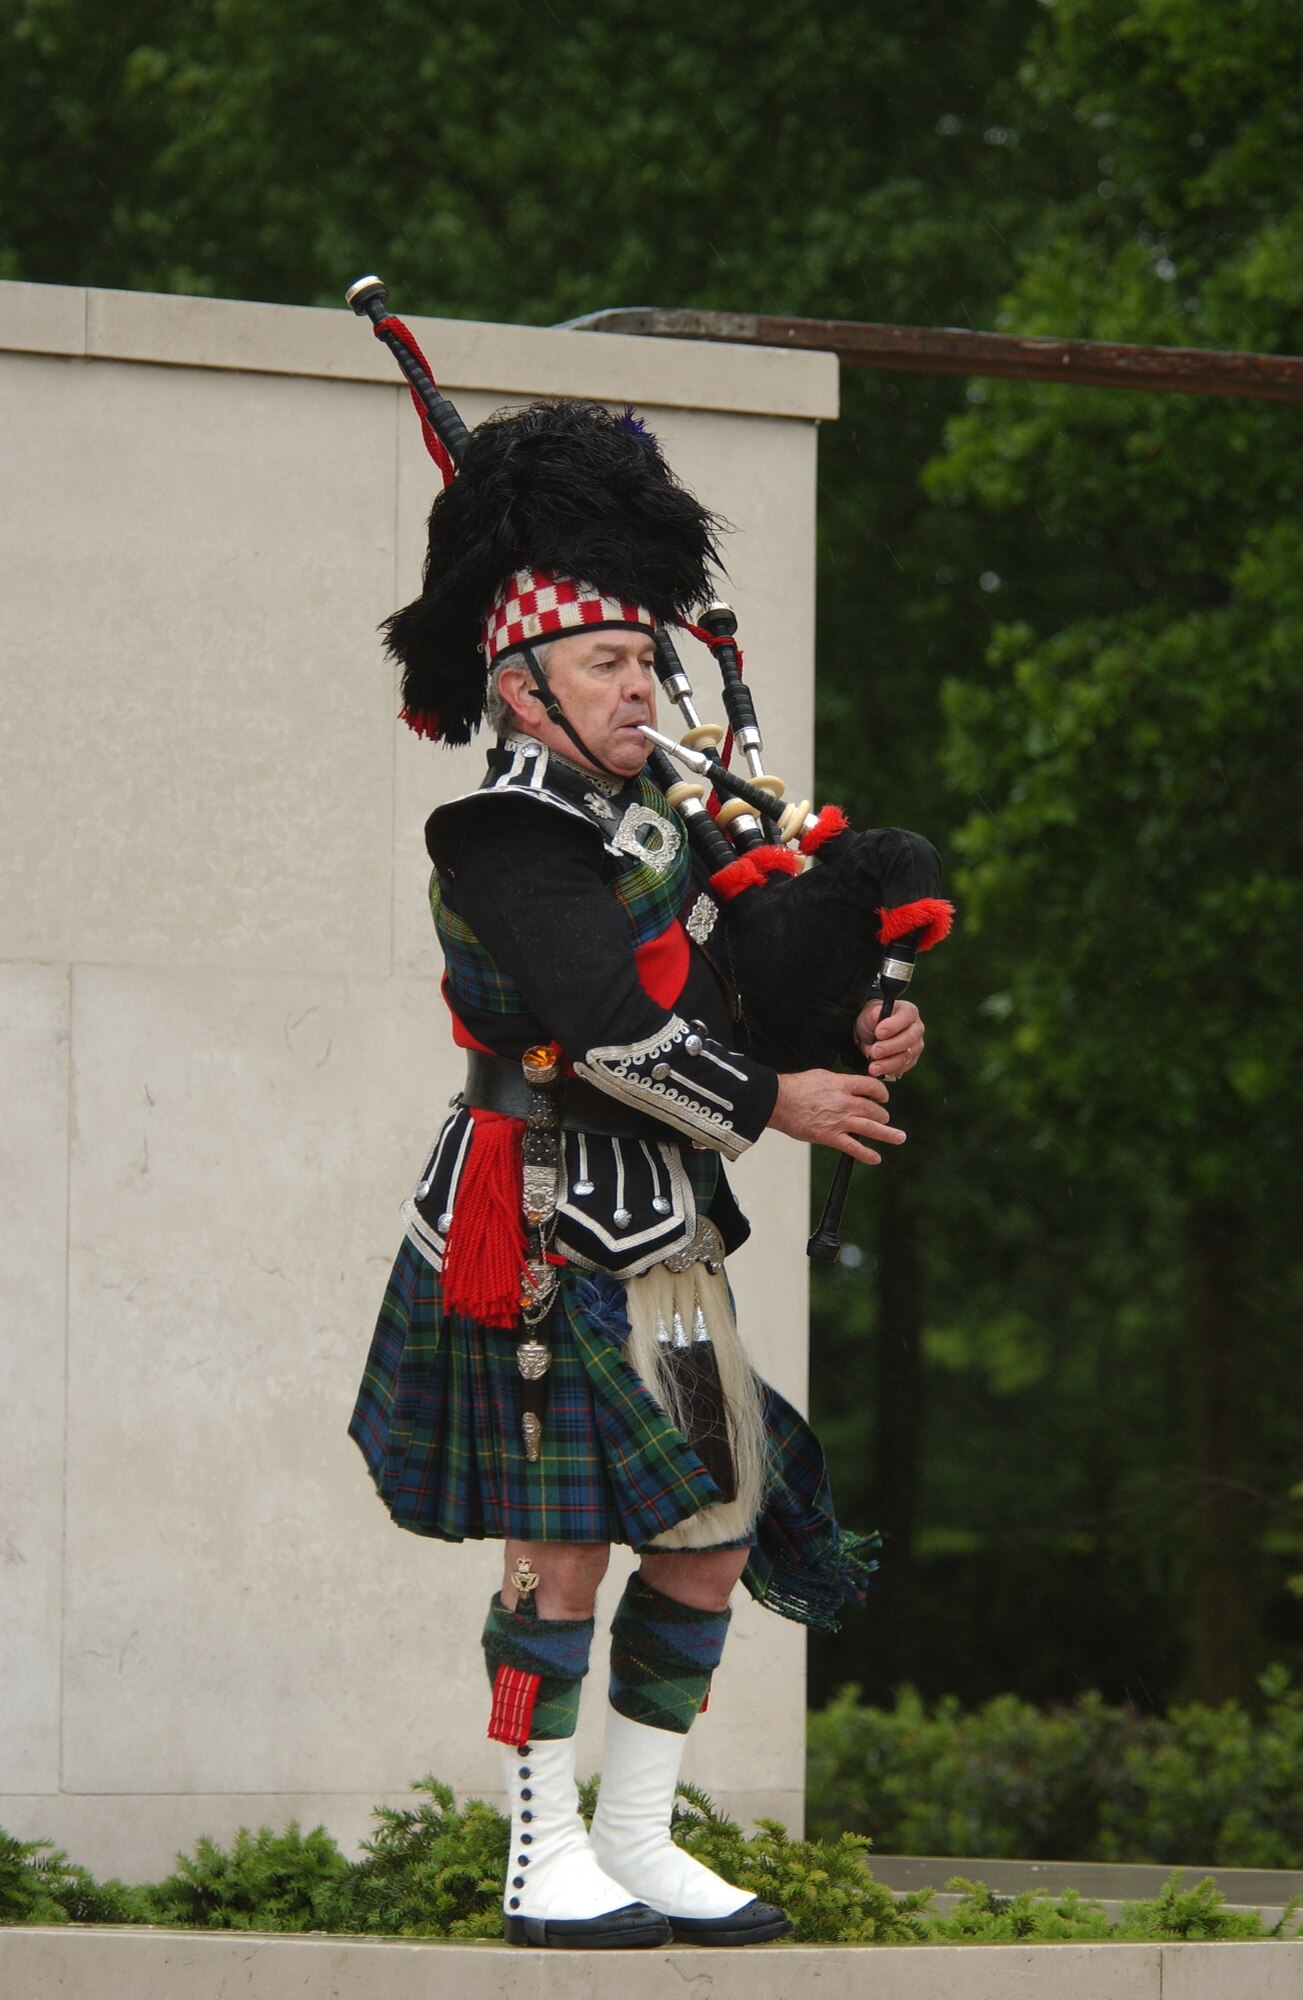 As a tribute to the men and women honored at the World War II American Cemetery, in Cambridge, Gary Kernaghan performs on the bag pipes despite the downpour during the annual Memorial Day ceremony, May 28, 2007.
(USAF Photo by: Tech. Sgt. Tracy L. DeMarco)